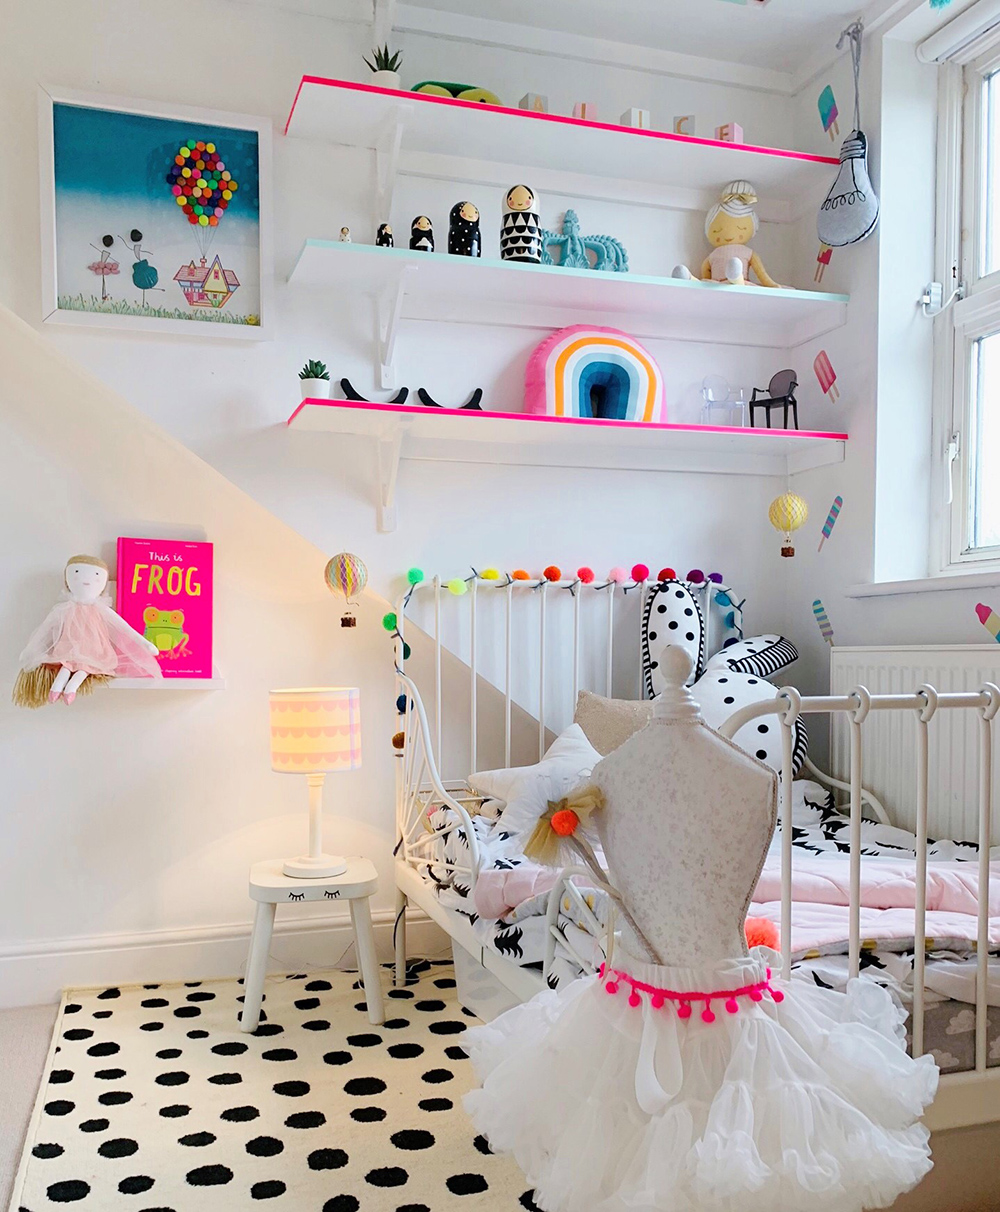 Ideas to incorporate colour in your home - use coloured washi tape around the edge of shelving